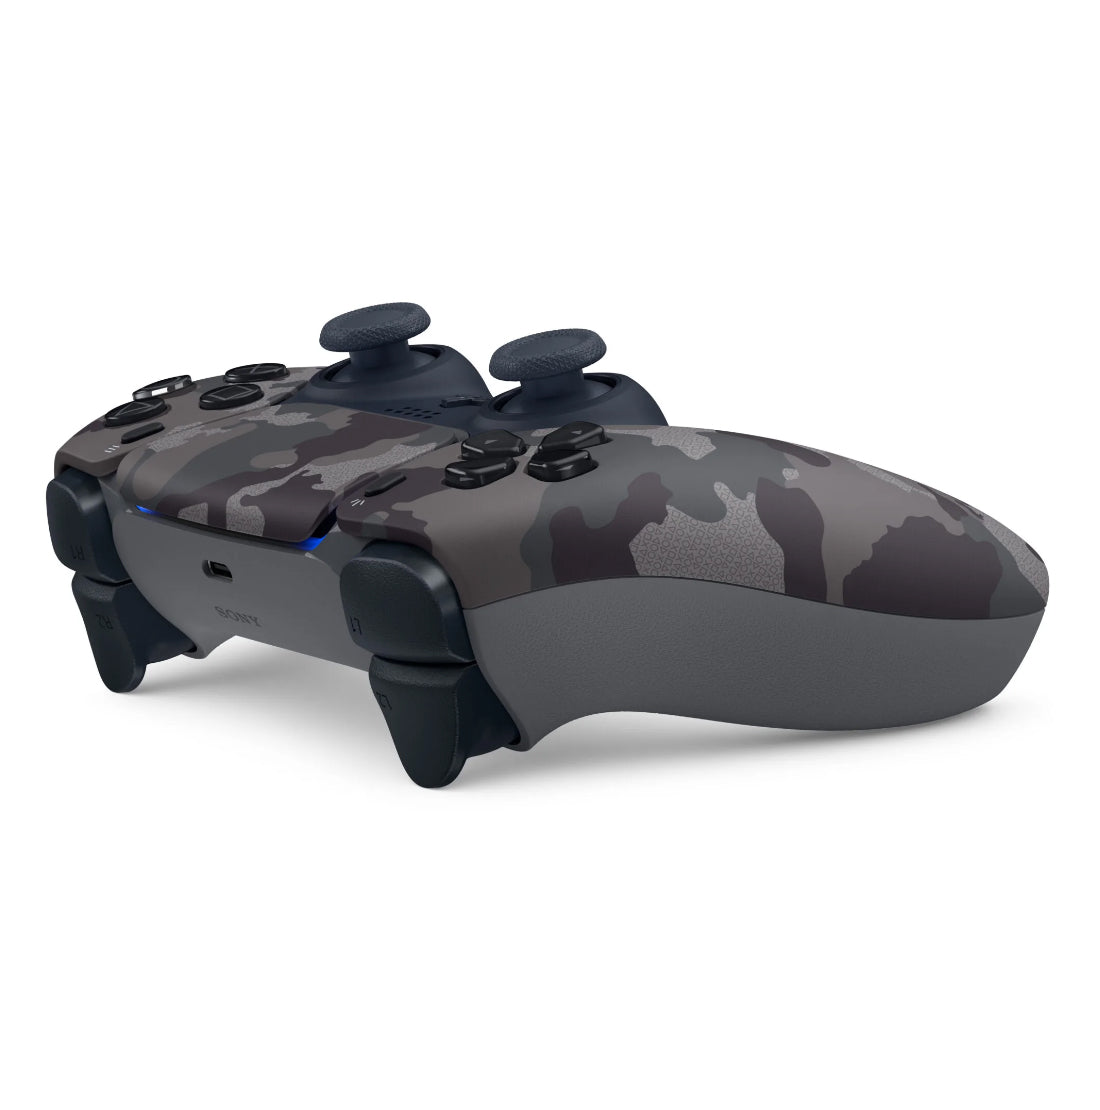 Sony Playstation 5 Disc Edition Bundle with Extra Gray Camo Controller, White PULSE 3D Wireless Headset and Trigger Kit - Pro-Distributing